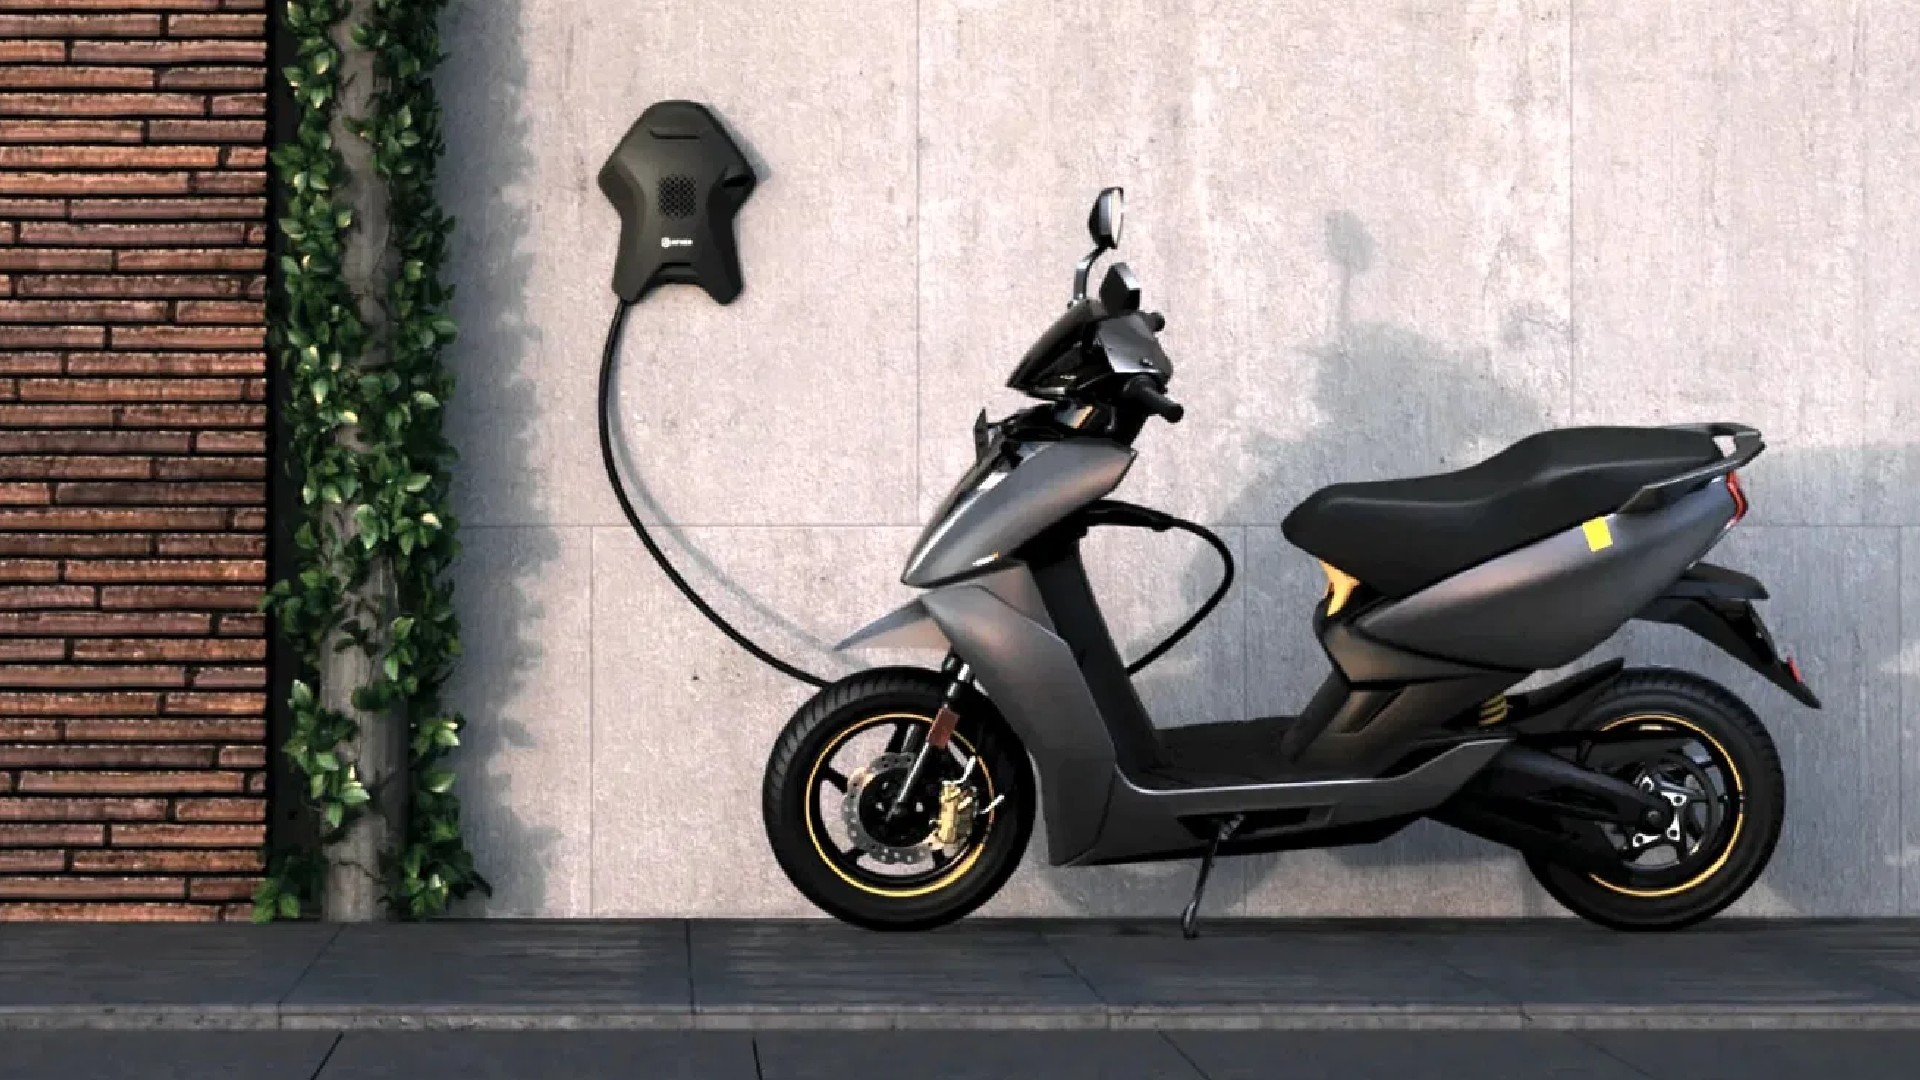 Ather To Extend Charging Network Further In Partnership With Magea EV